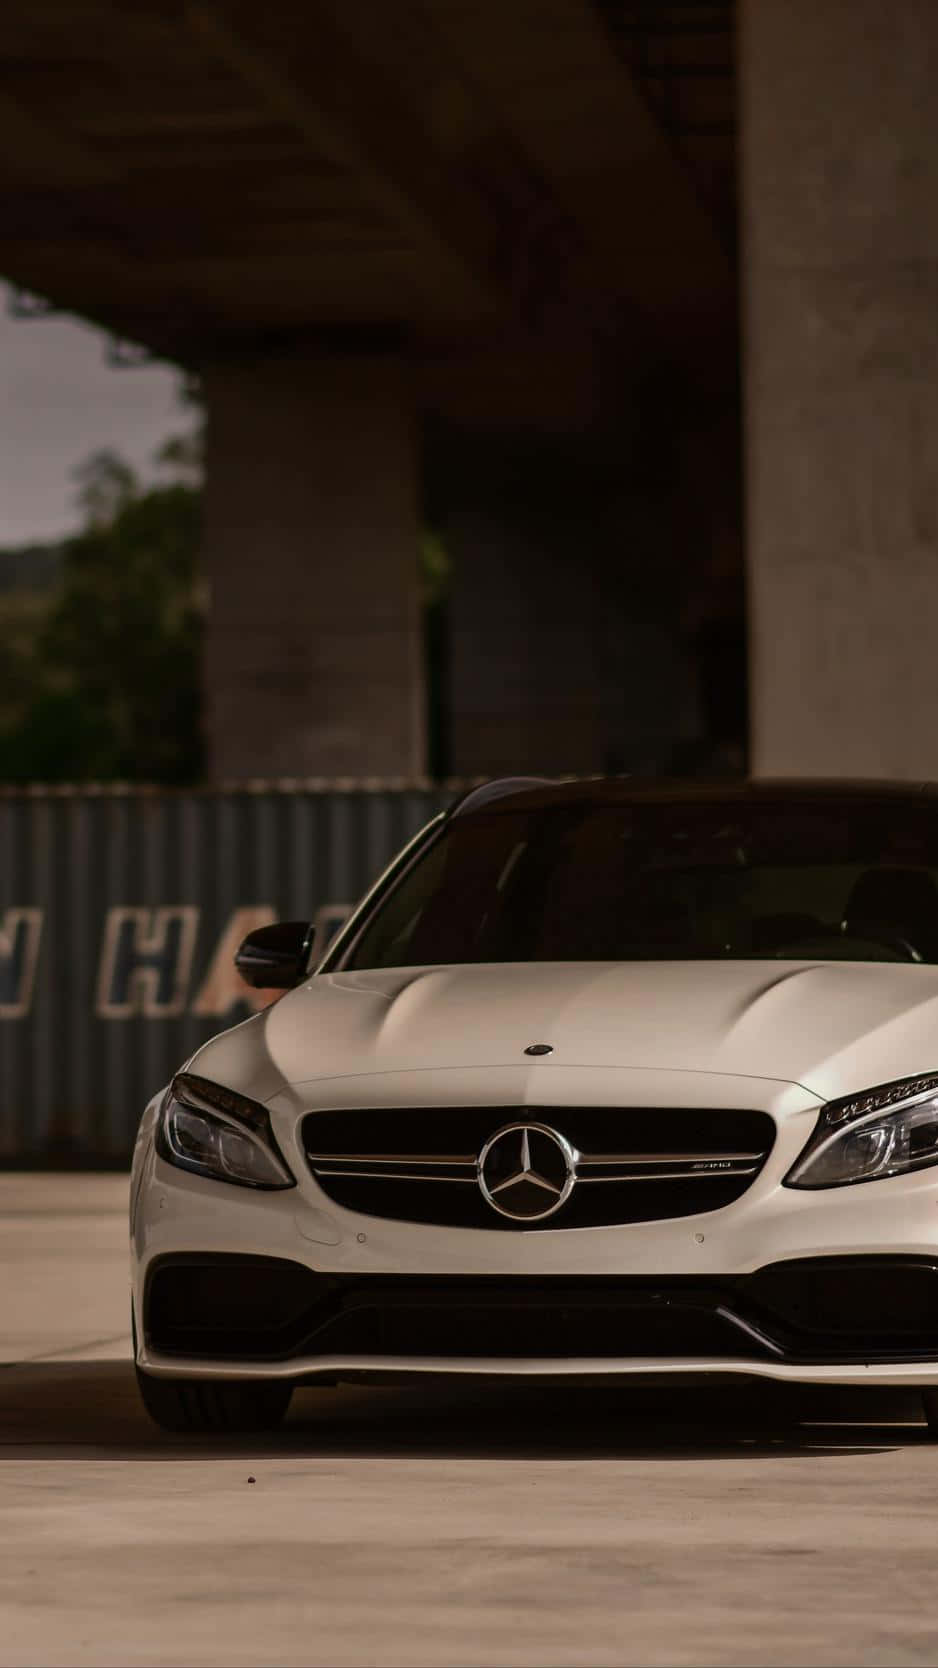 Drive Your Digital Life in Style with the Mercedes Benz Iphone Wallpaper